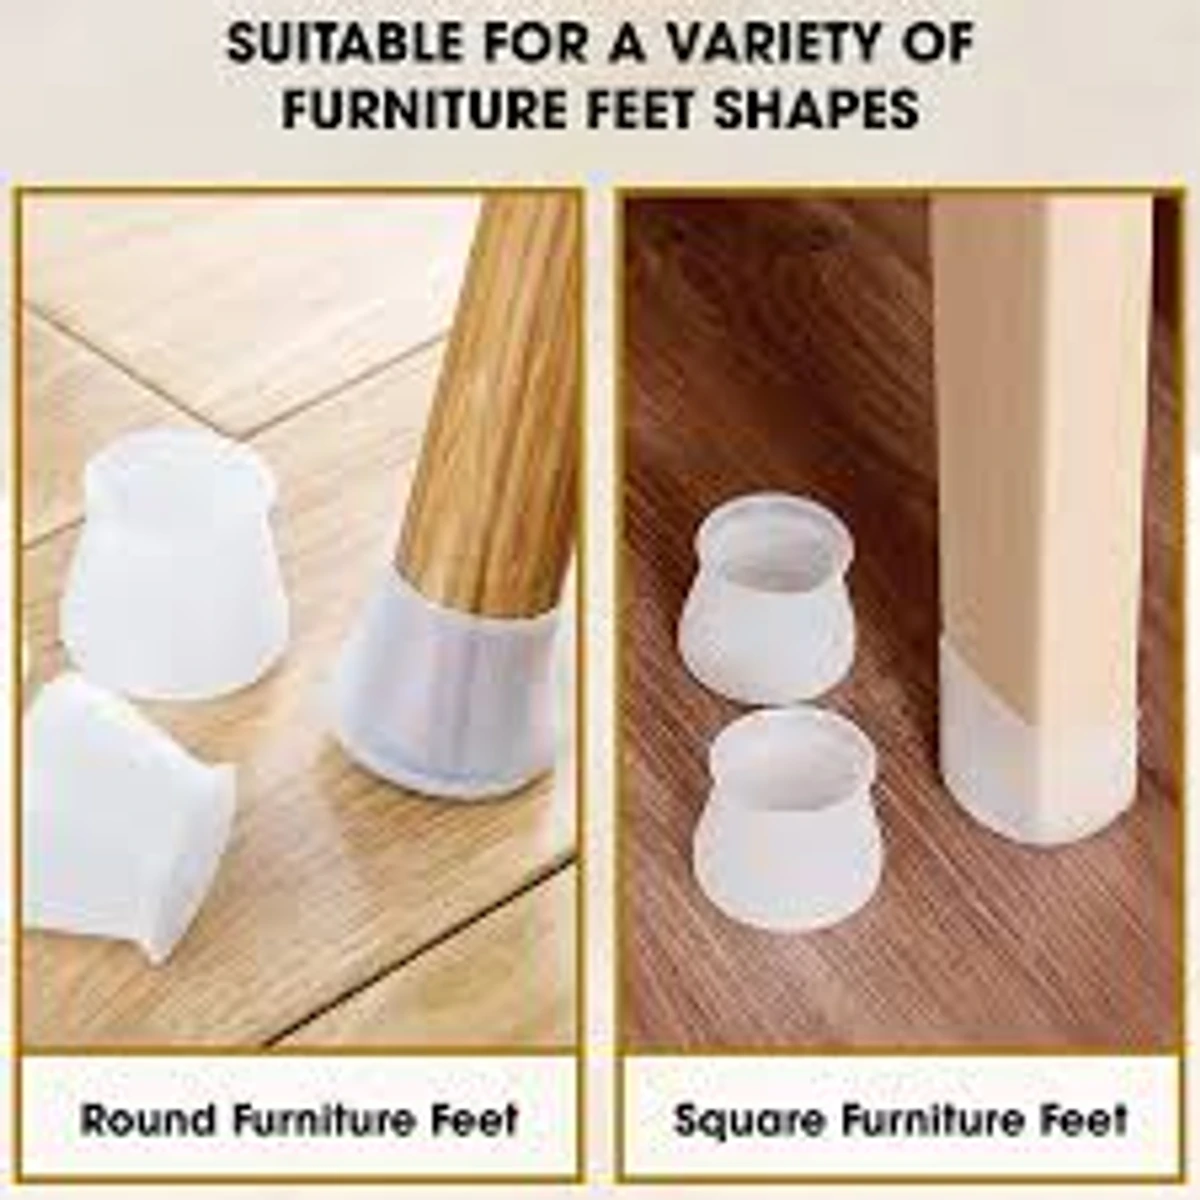 24 pcs Chair Leg Floor Protectors Felt Bottom Furniture Silicone Leg Caps, Chair Leg Covers to Reduce Noise, Easily Moving for Furniture Chair Feet,(white colour)